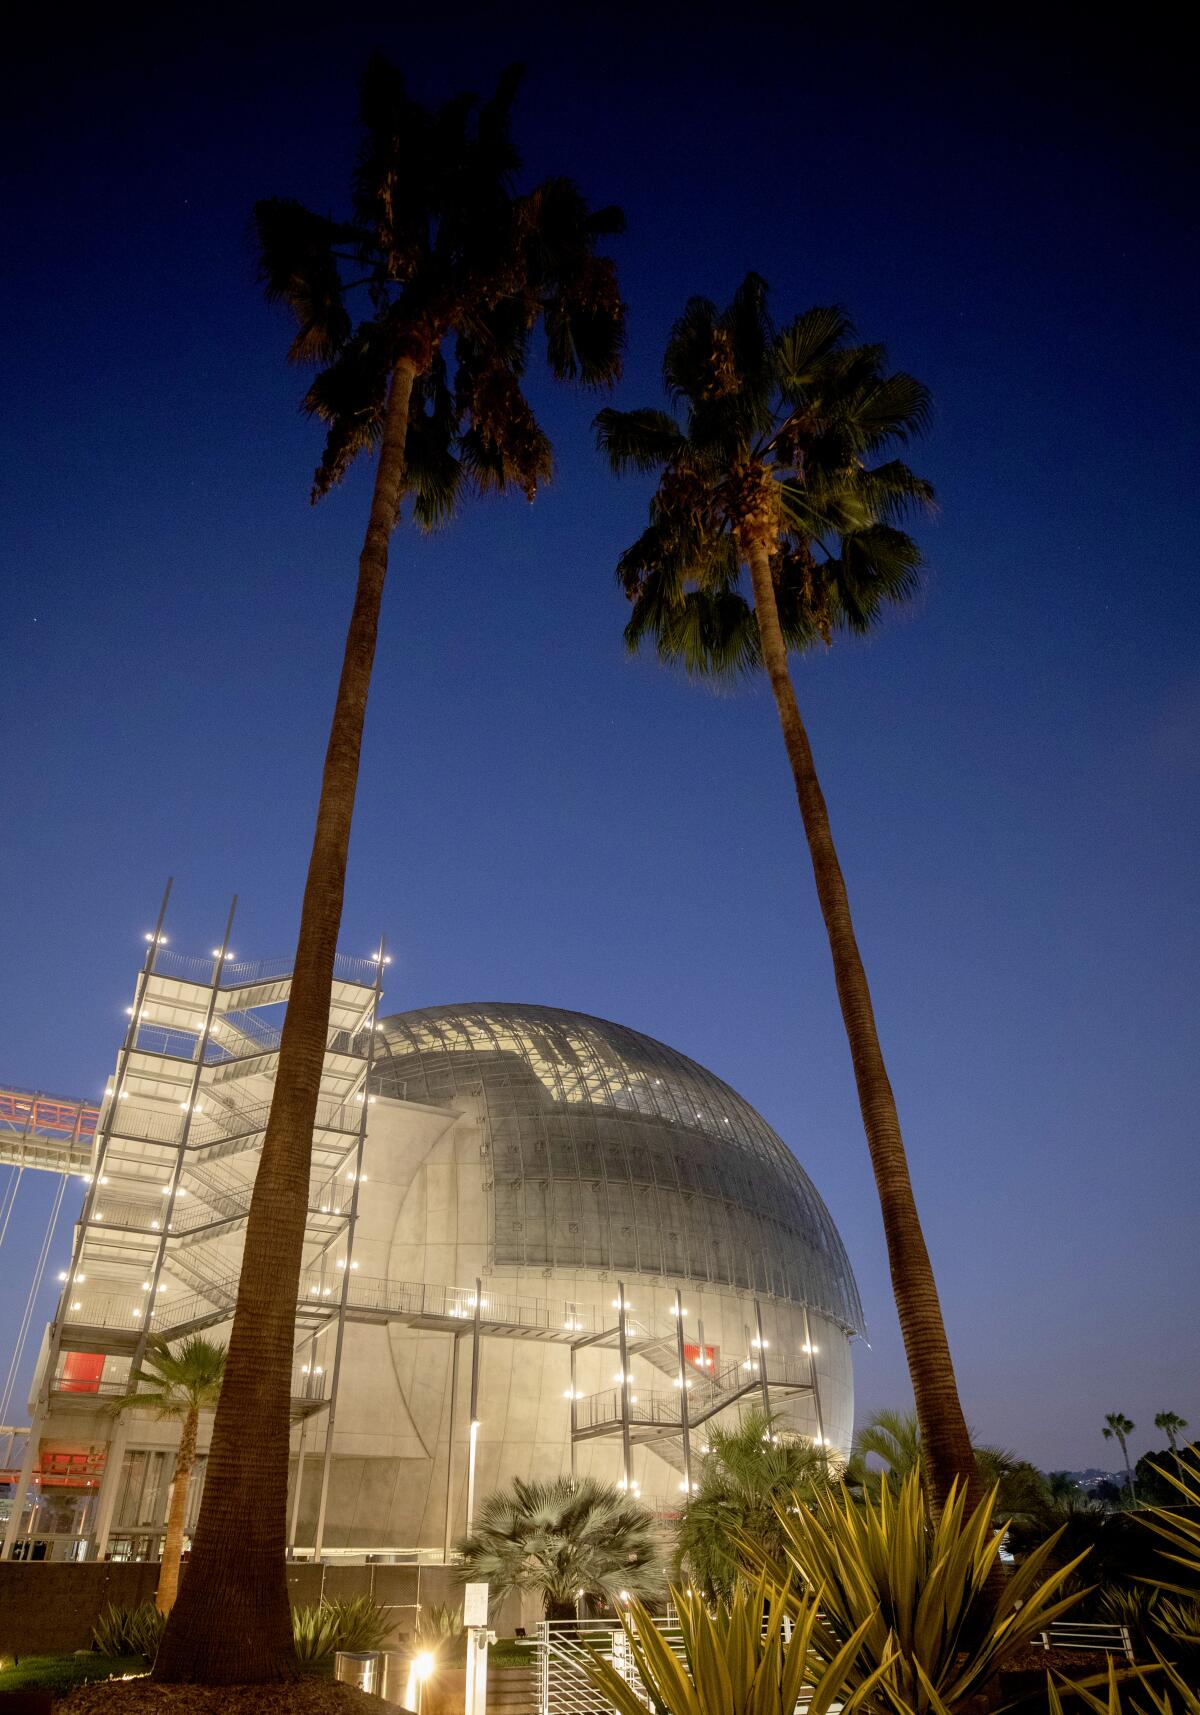 The Academy of Motion Pictures Museum at night, framed by two palm trees.